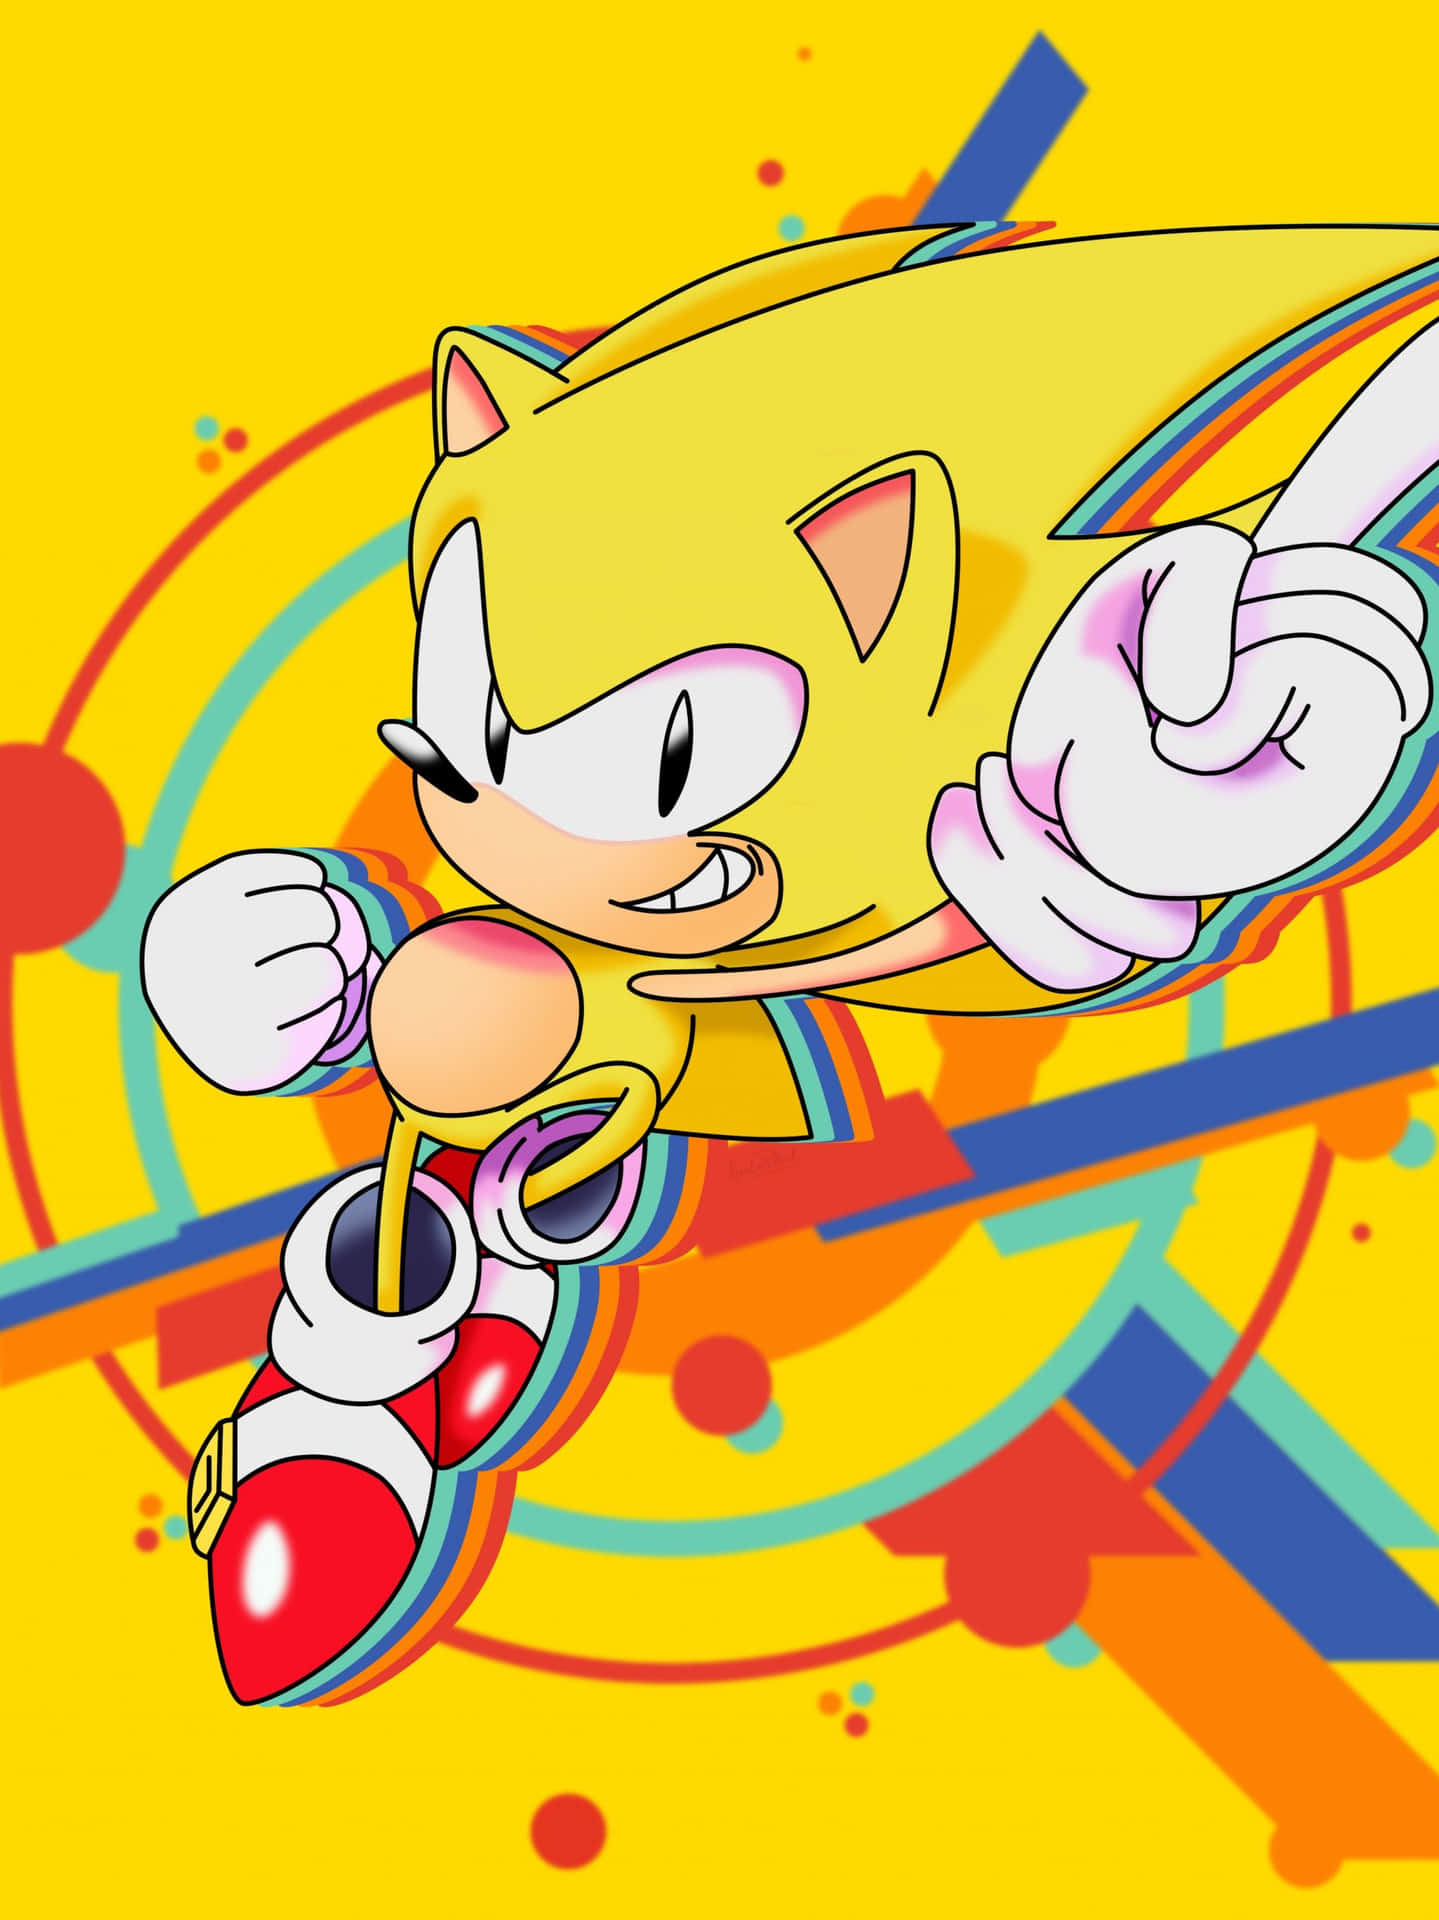 Sonic CD Sonic 3D Sonic Battle Sonic Mania Toei Animation Toei Animation  sonic The Hedgehog computer Wallpaper cartoon png  PNGWing